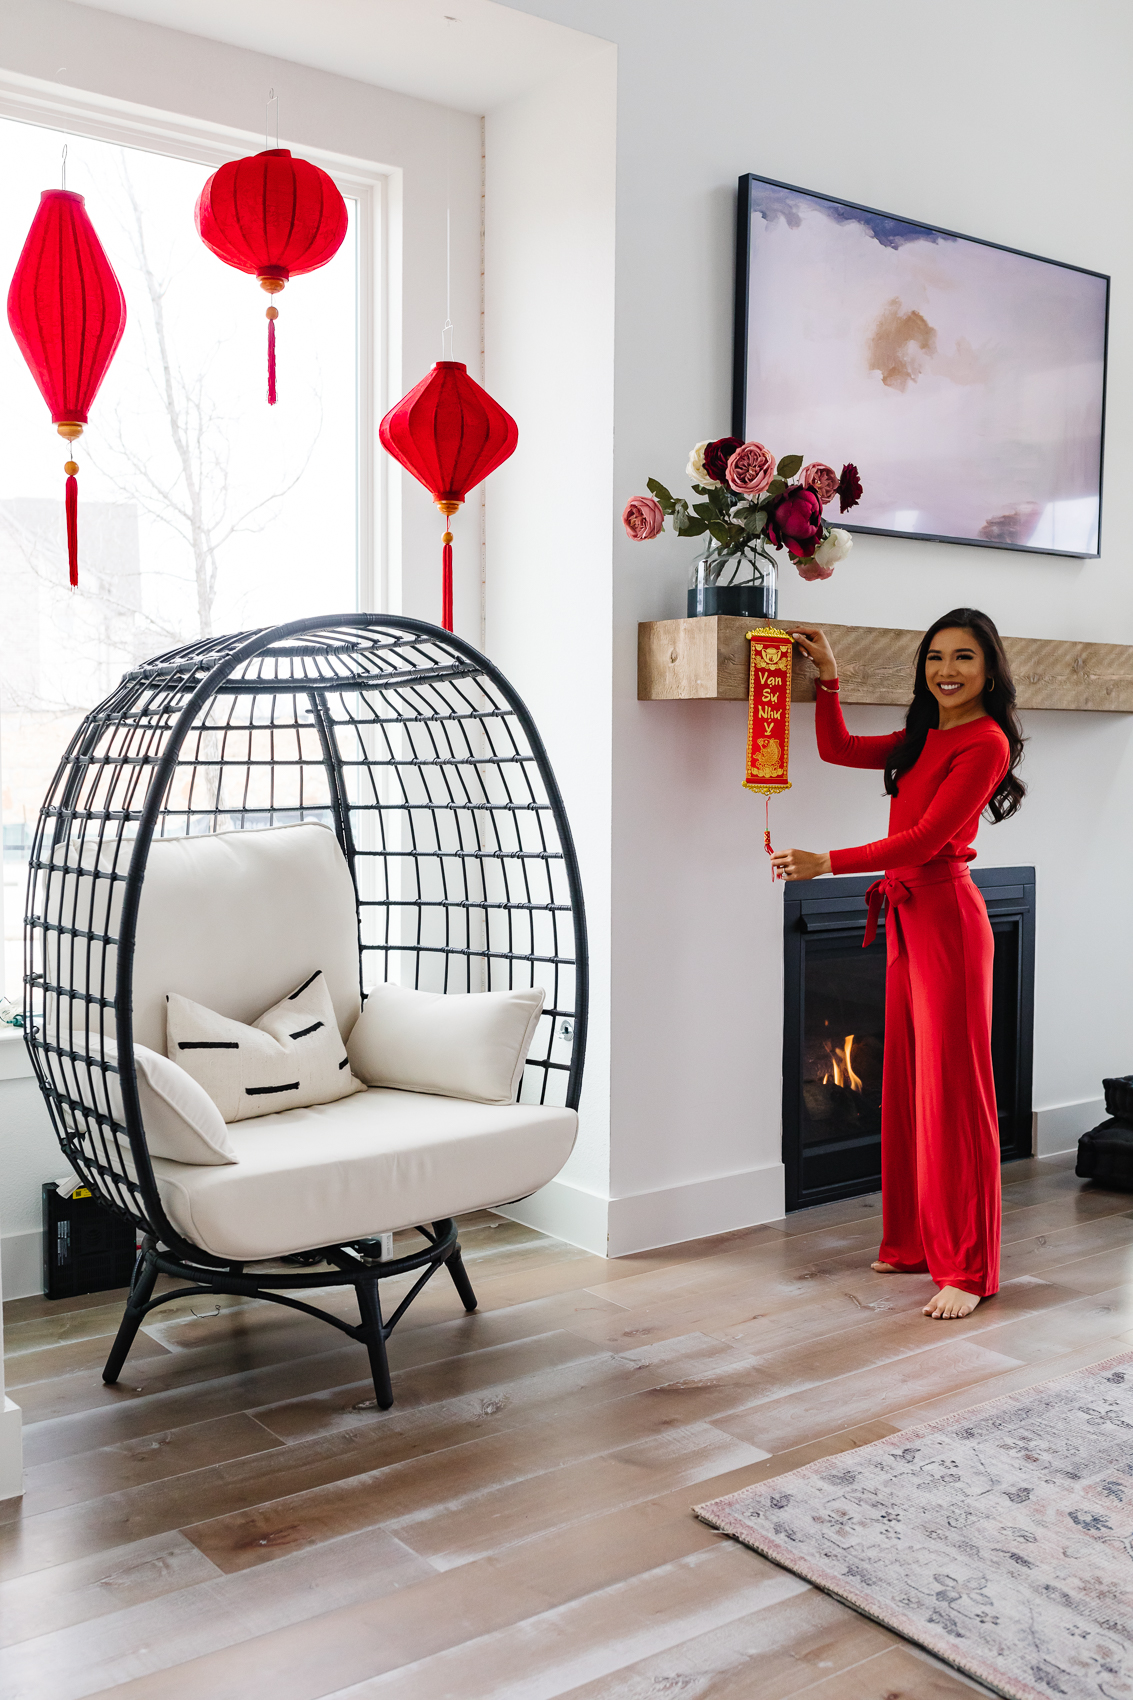 Start Celebrating with These Lunar New Year Decorations for Your